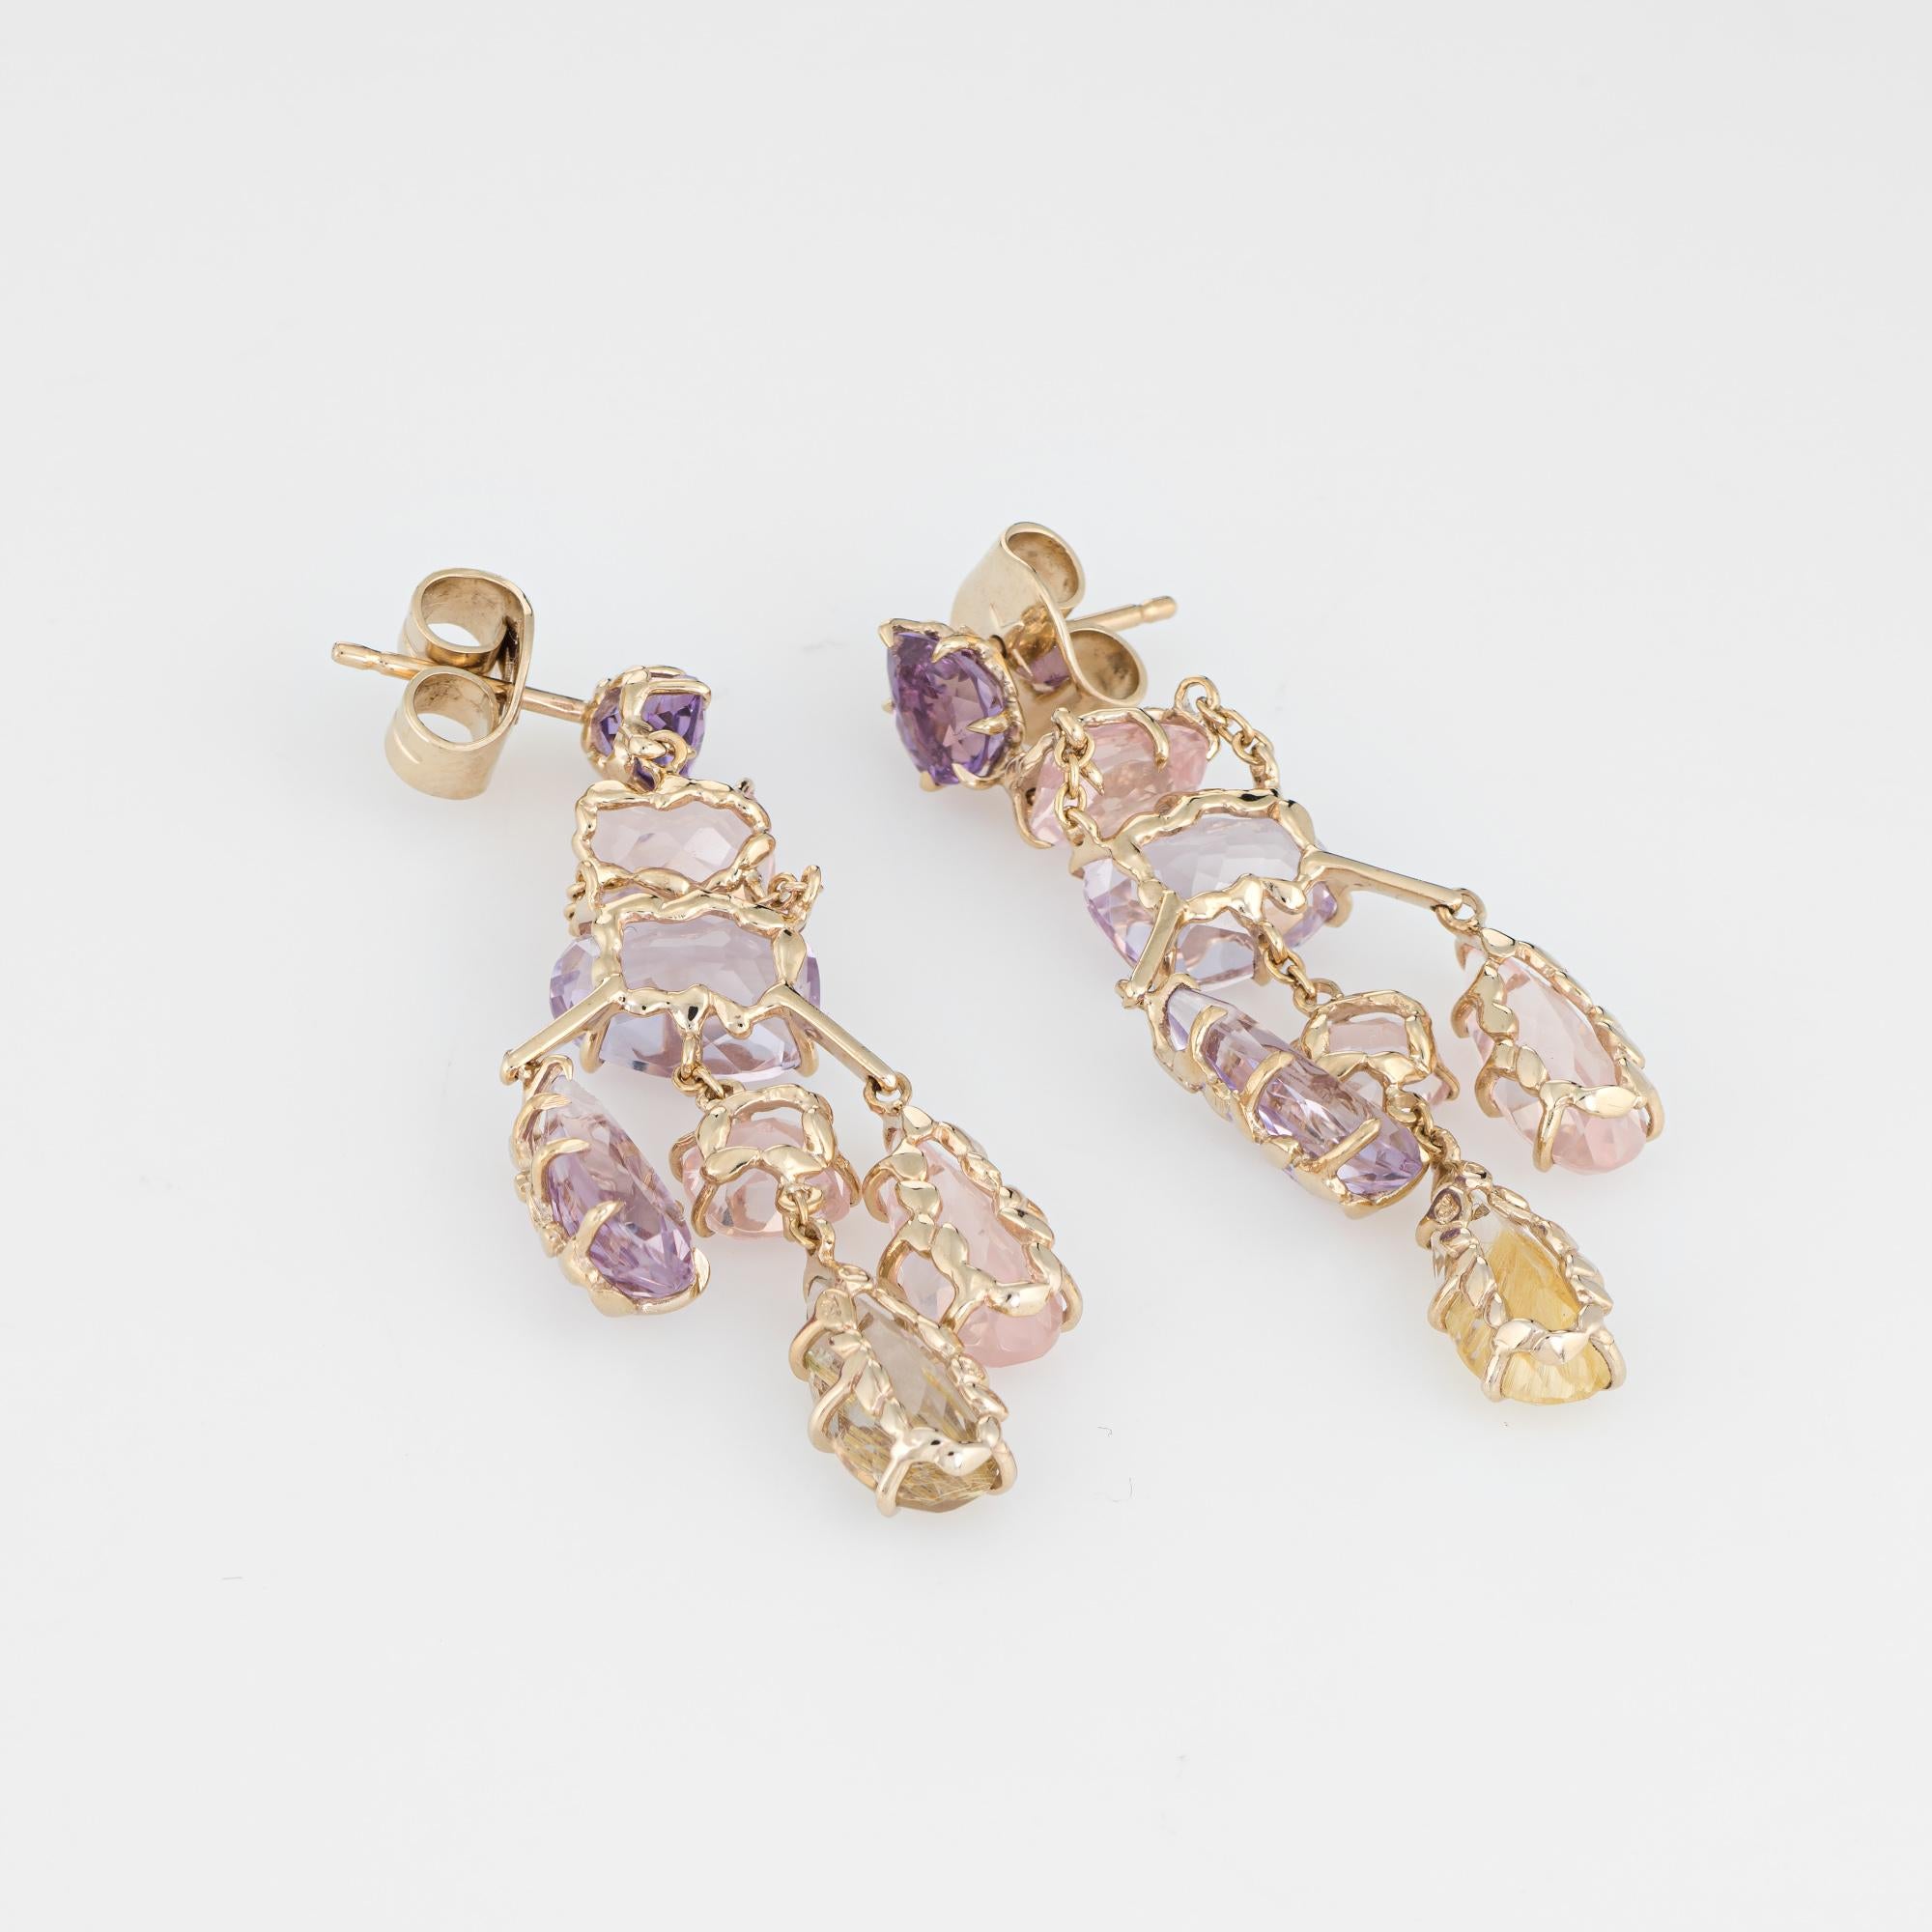 Elegant pair of pre owned H Stern cobblestone earrings, crafted in 18k yellow gold. 

Amethyst, rose quartz and rutilated quartz in various cuts are set into the earrings. The stones are in excellent condition and free of cracks or chips. 

The